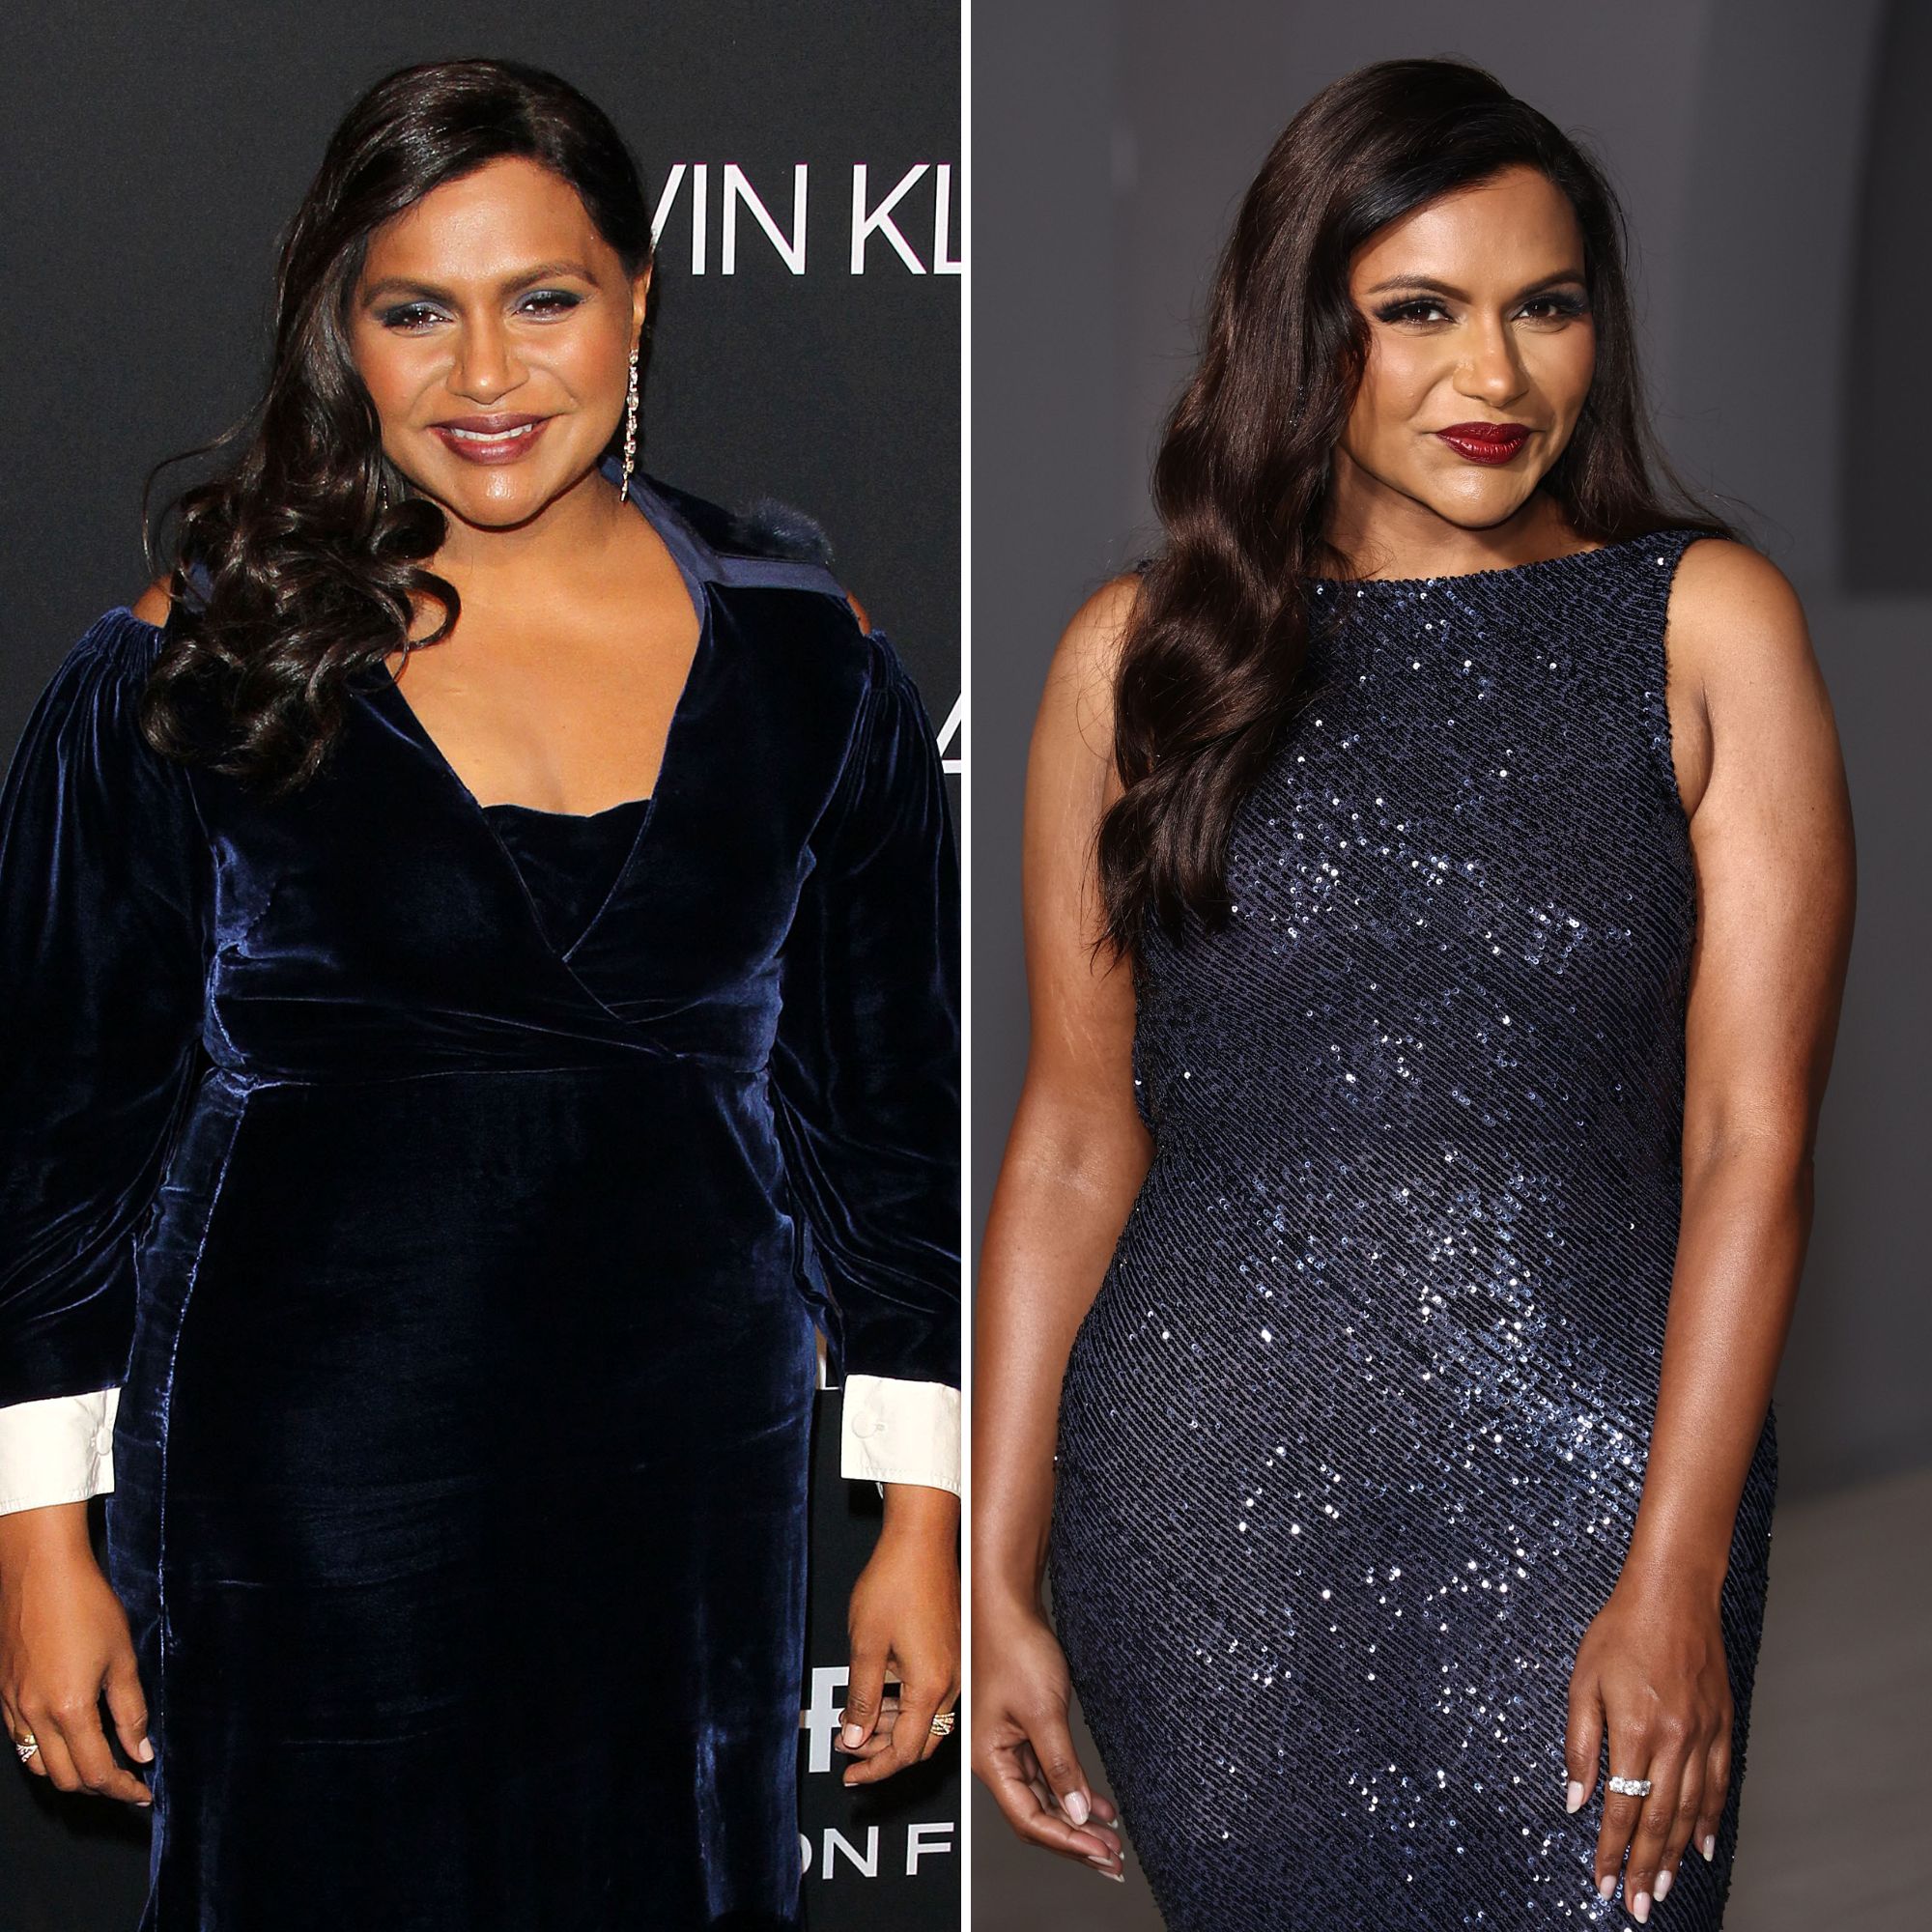 Mindy Kaling's Weight Loss Transformation Photos: Before, After Pictures